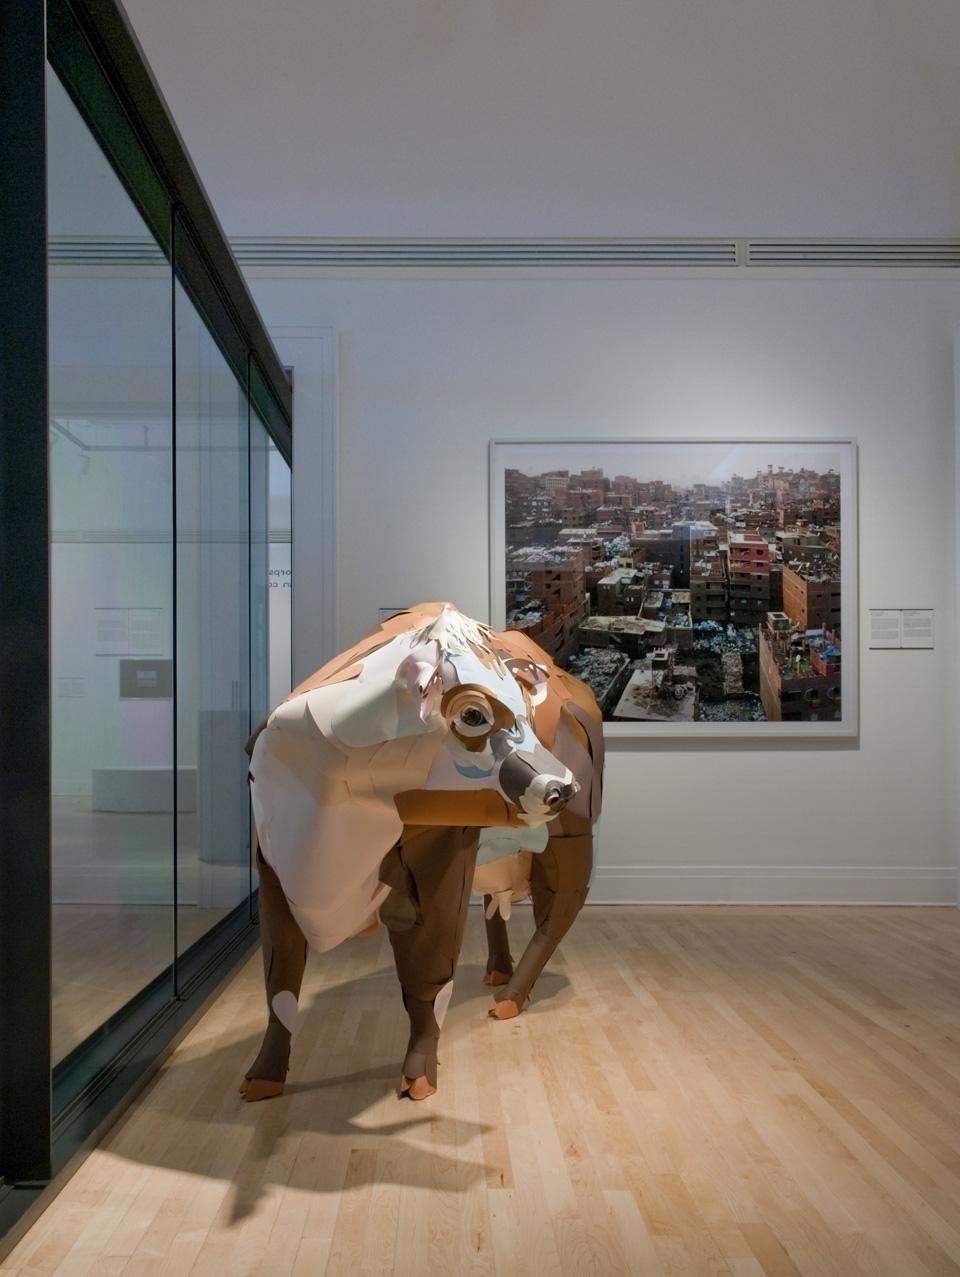 <em>Imperfect Health: the Medicalization of Architecture</em>, installation view. Cow by Andy Byers. Photo © CCA, Montréal